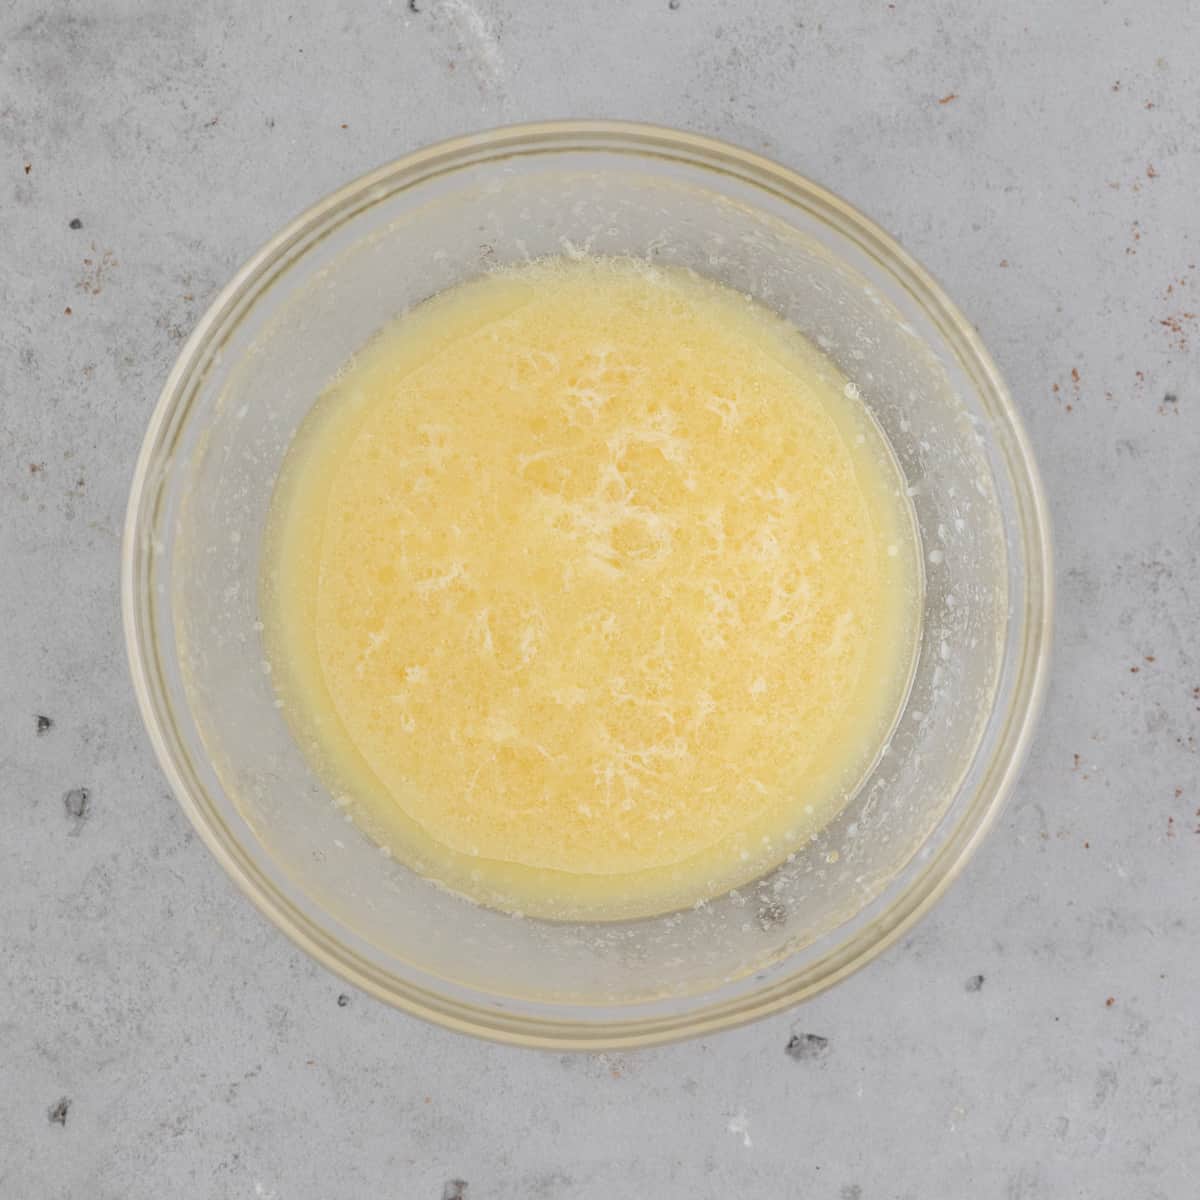 the wet ingredients combined in a glass bowl on a grey background